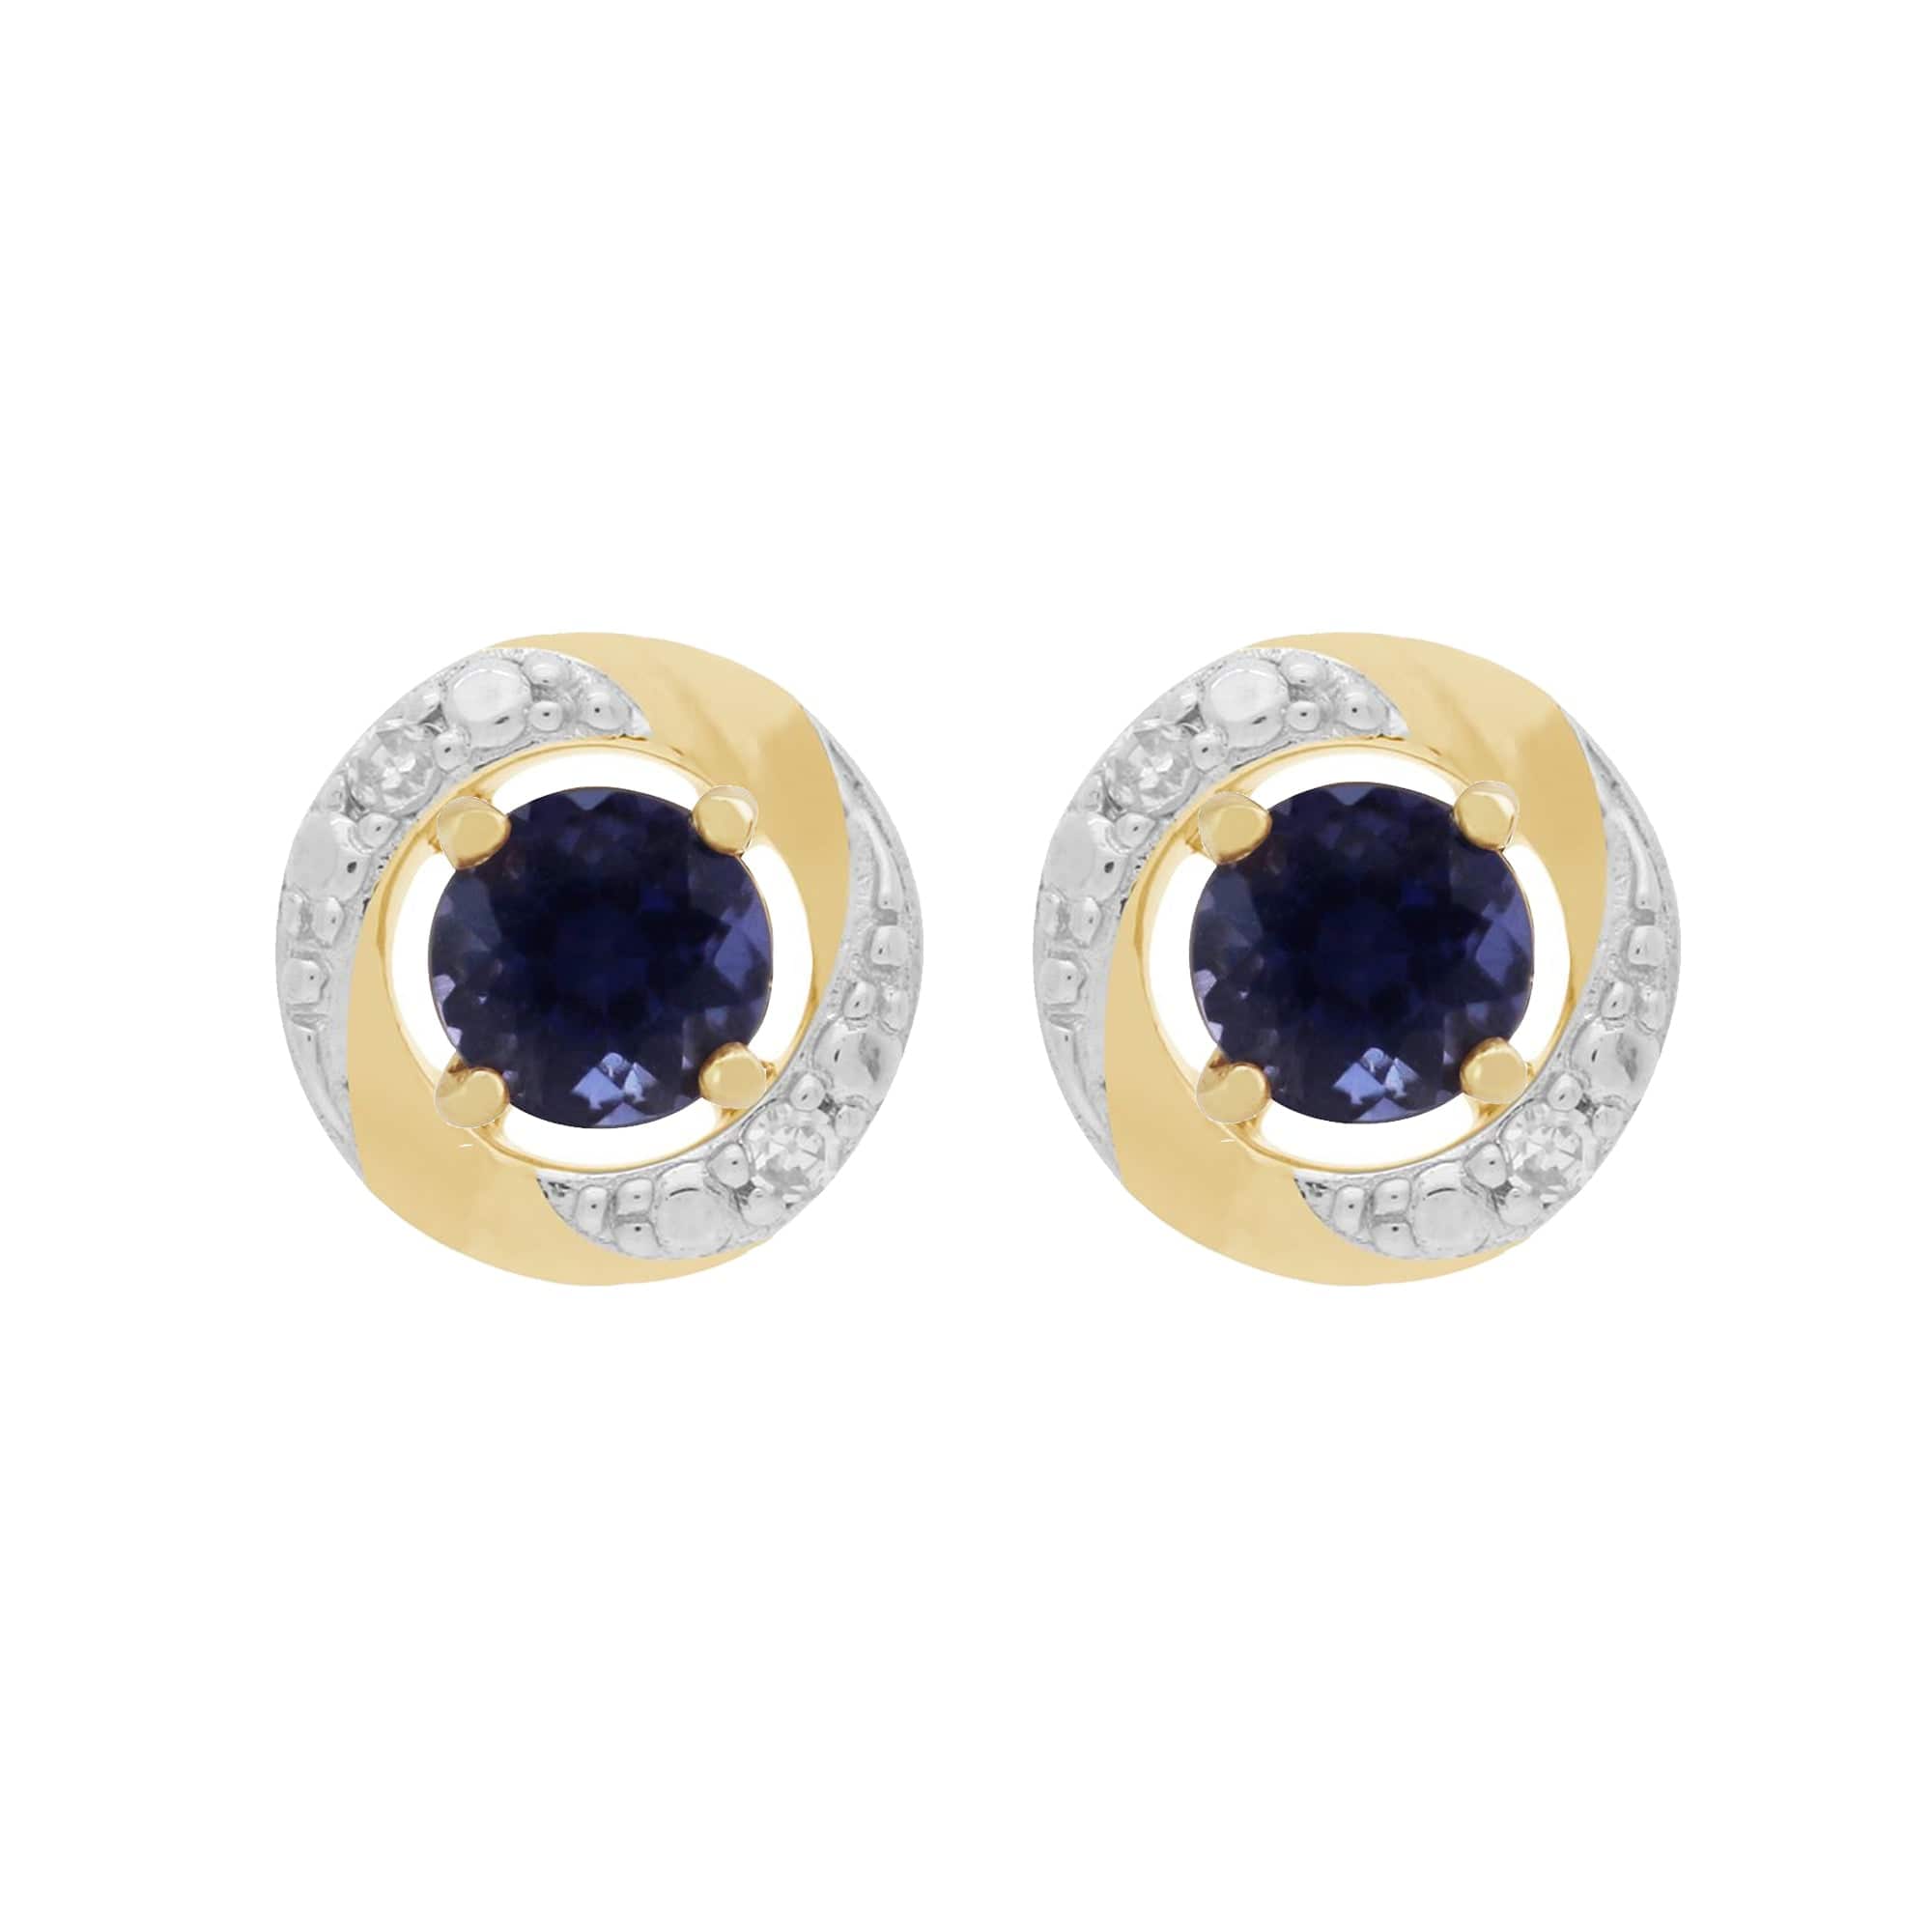 11556-191E0374019 Classic Round Iolite Stud Earrings with Detachable Diamond Halo Ear Jacket in 9ct Yellow Gold 1